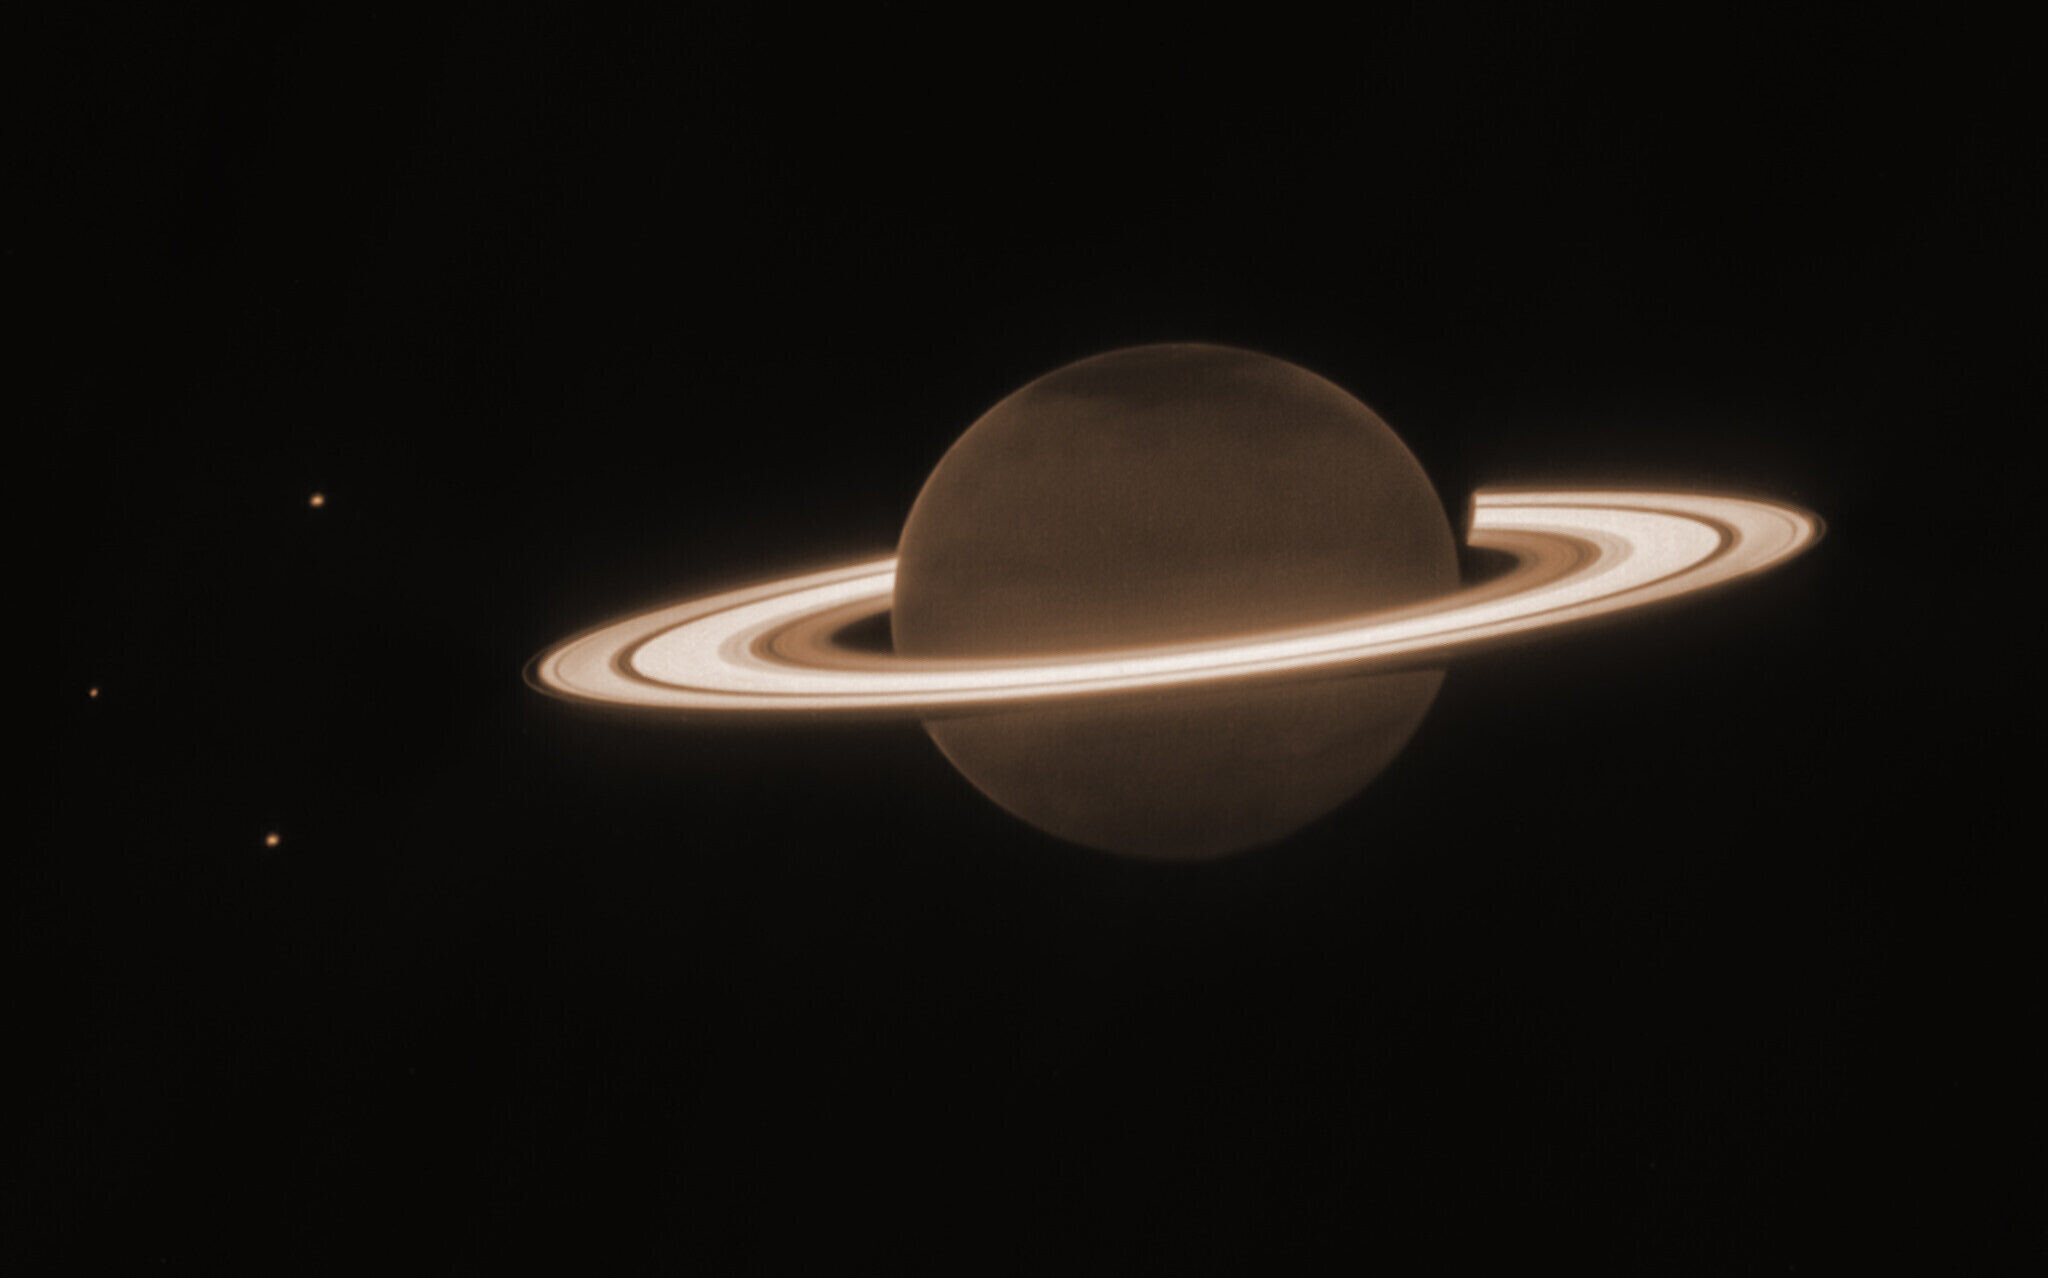 planetary ring - Could a cross-ringed planet exist? - Astronomy Stack  Exchange